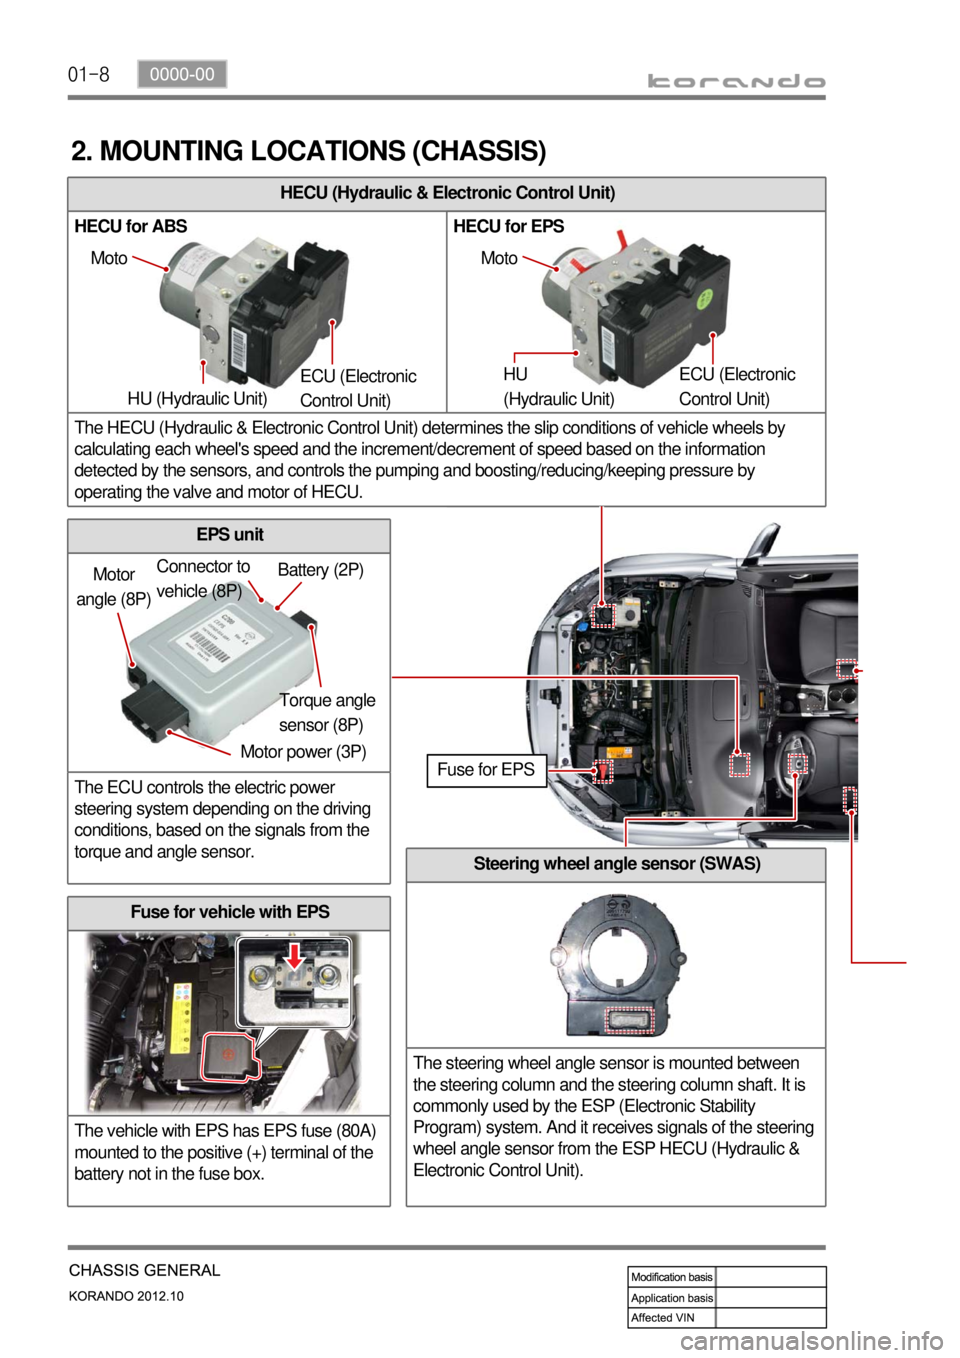 SSANGYONG KORANDO 2012  Service Manual 01-8
Fuse for vehicle with EPS
The vehicle with EPS has EPS fuse (80A) 
mounted to the positive (+) terminal of the 
battery not in the fuse box.
EPS unit
The ECU controls the electric power 
steering